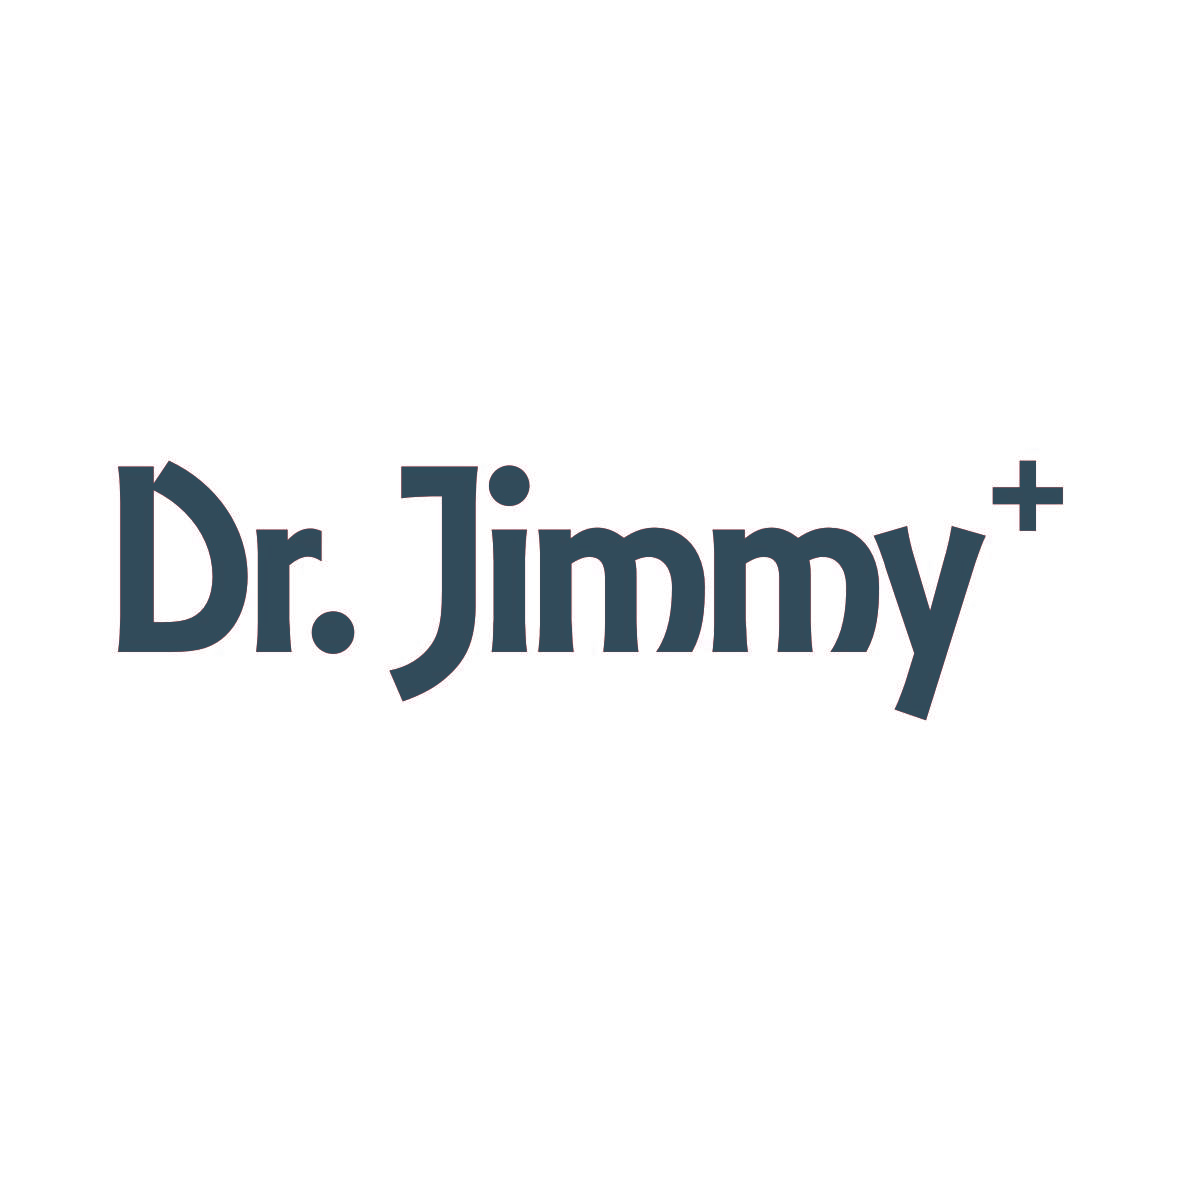 DR. JIMMY+